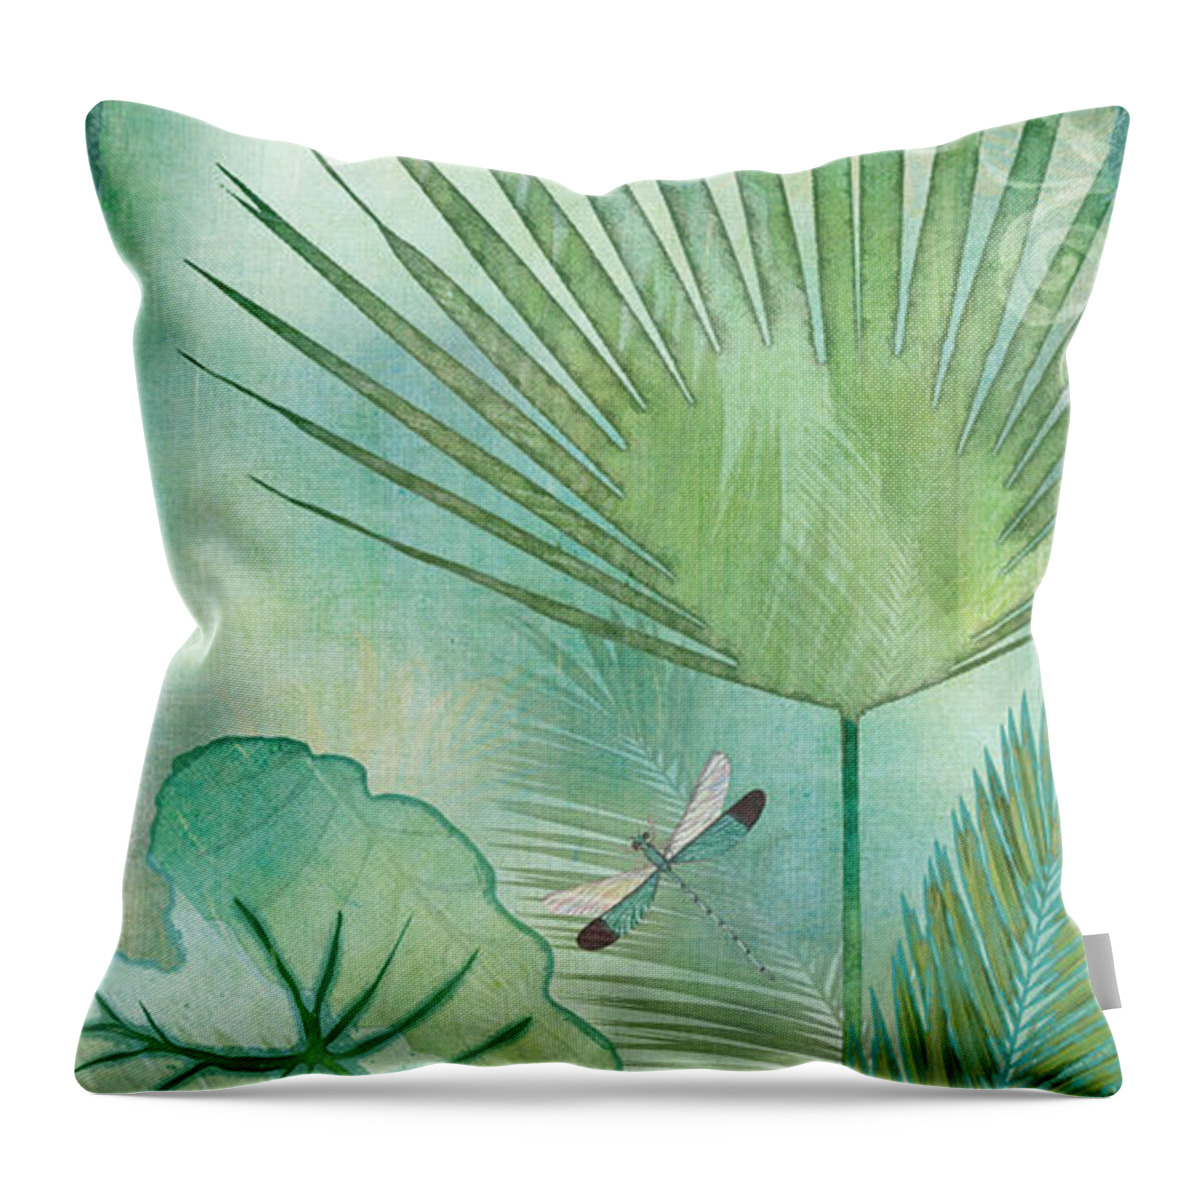 Jungle Throw Pillow featuring the painting Rainforest Tropical - Elephant Ear and Fan Palm Leaves w Botanical Dragonfly by Audrey Jeanne Roberts